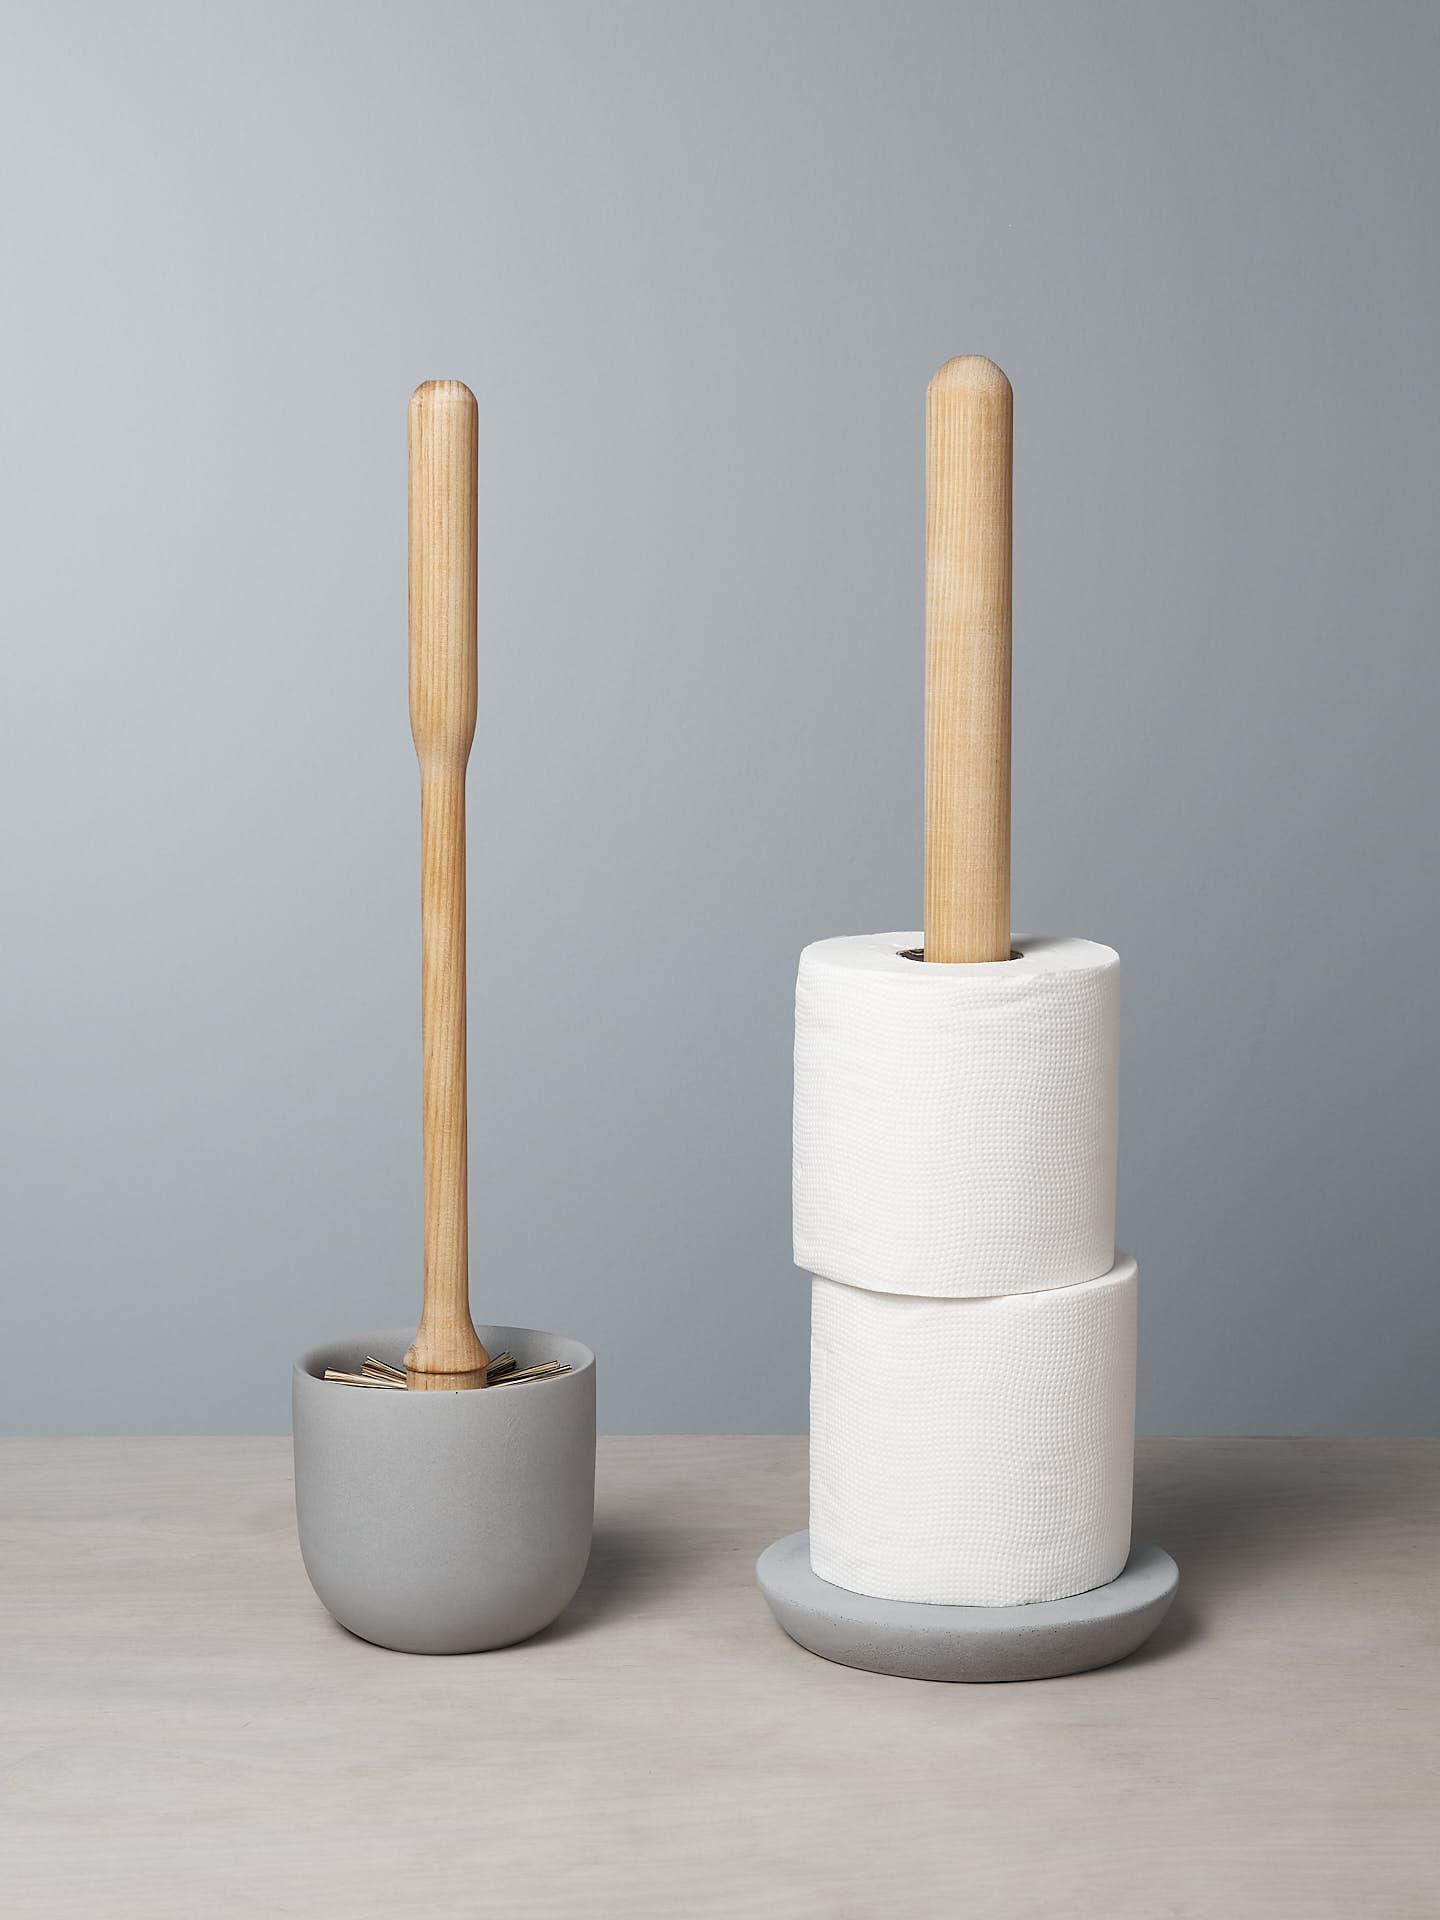 An Iris Hantverk Toilet Brush + Toilet Roll Holder Set is placed next to a toilet roll holder containing two rolls of white toilet paper on a soft concrete surface.